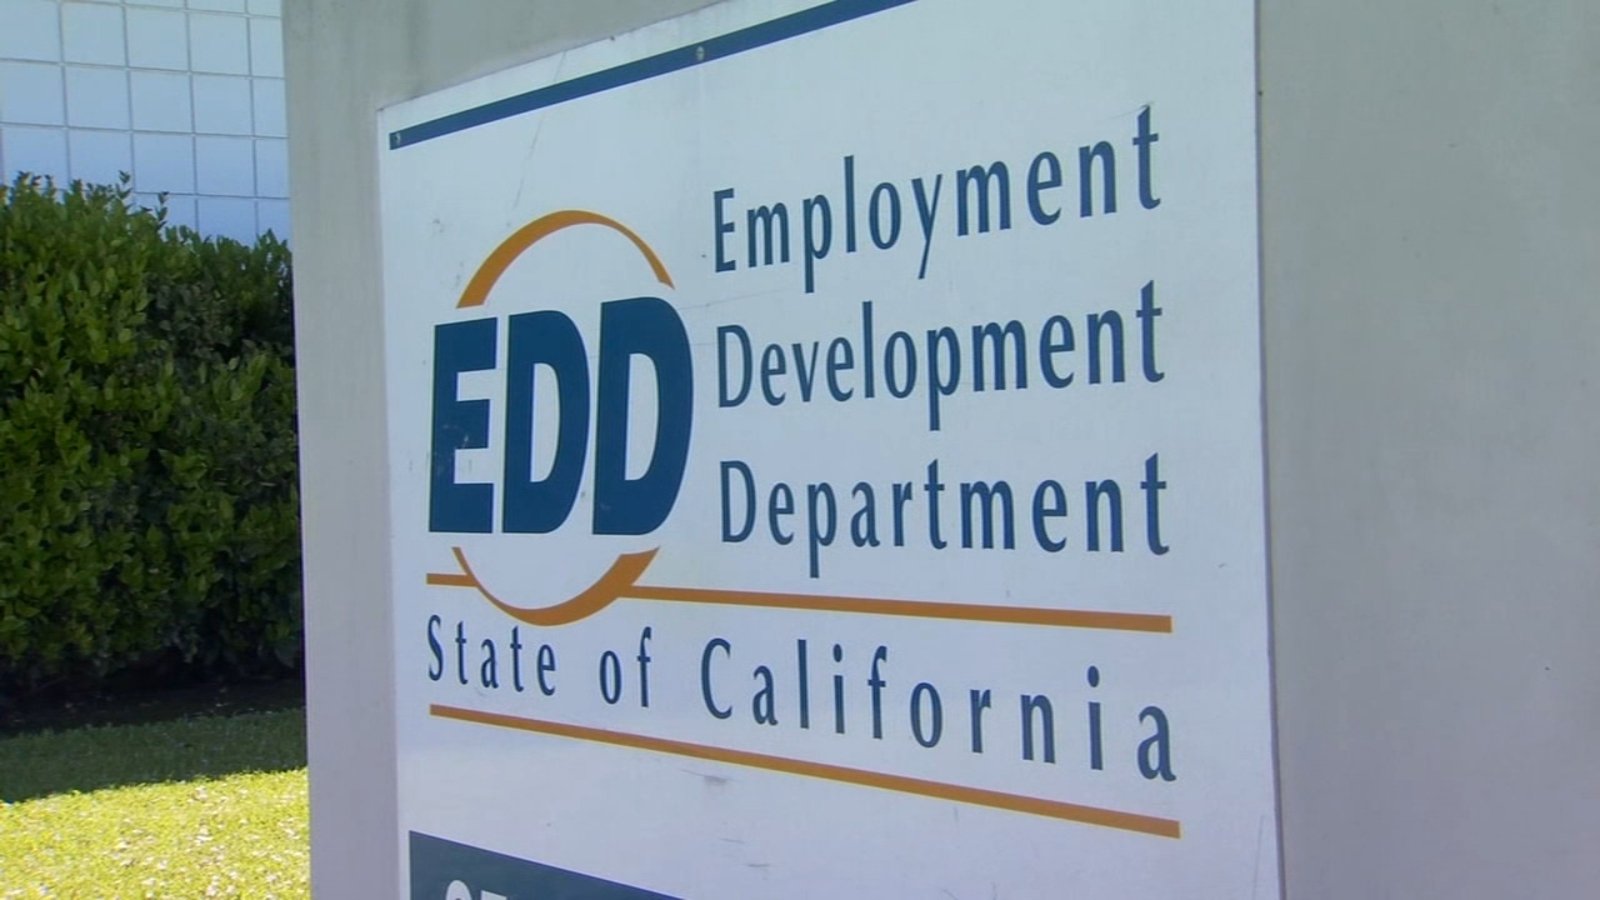 Have a question about unemployment in California? Here